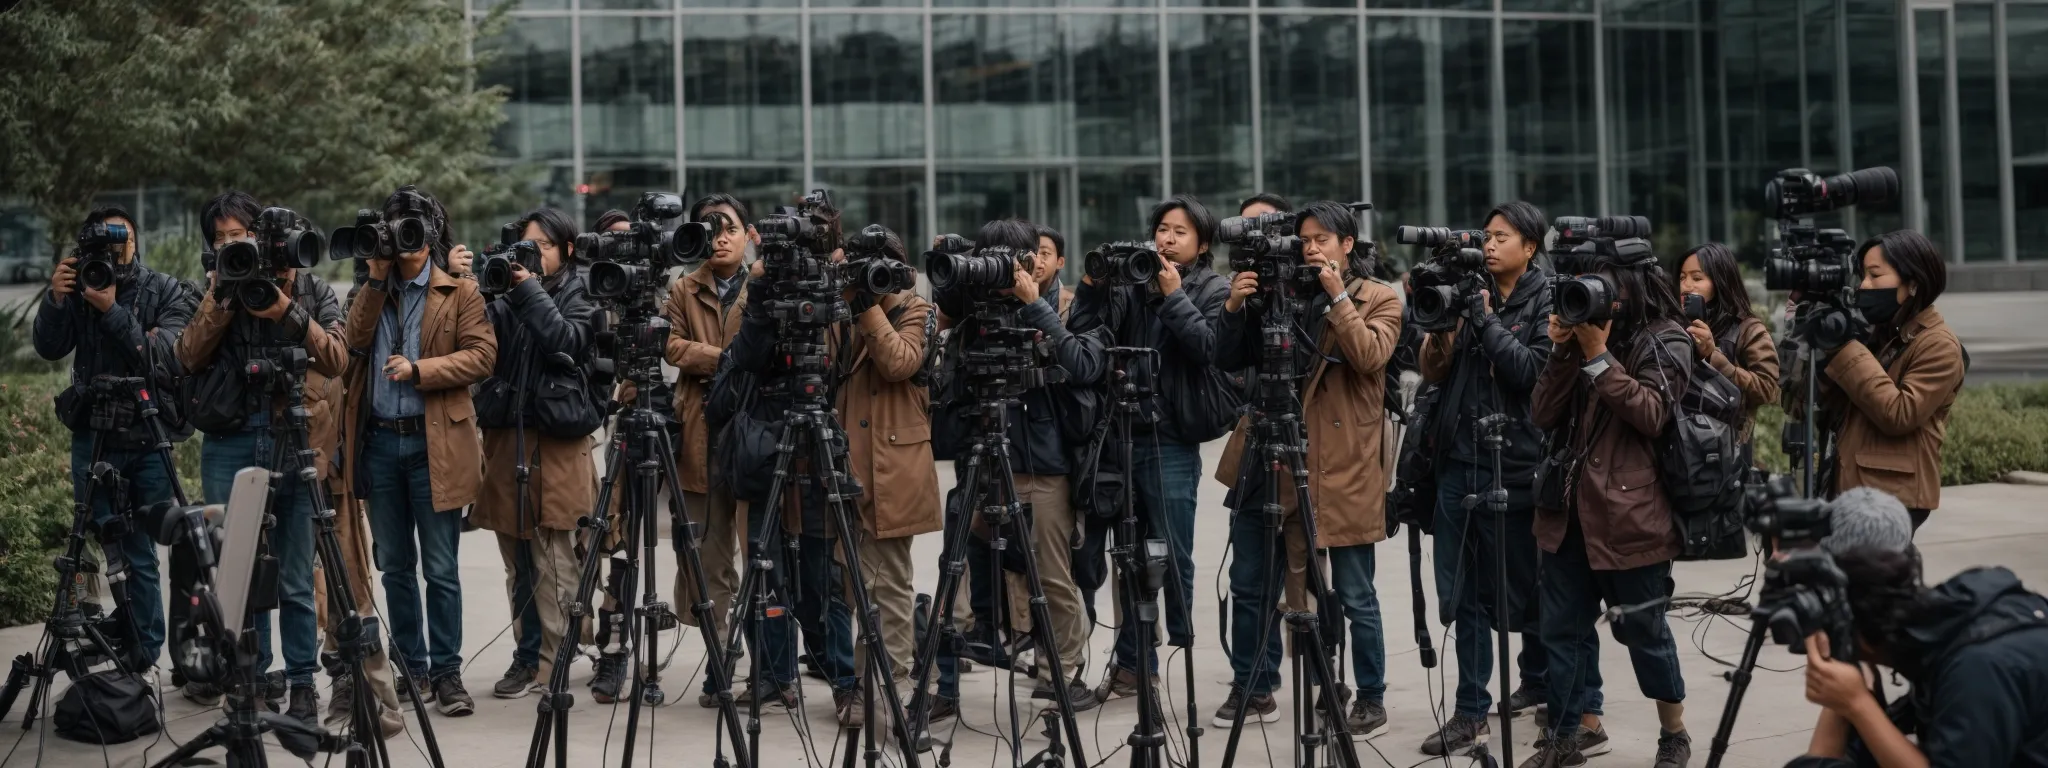 a row of diverse journalists holding cameras and microphones in front of a corporate building ready to cover a breaking story.